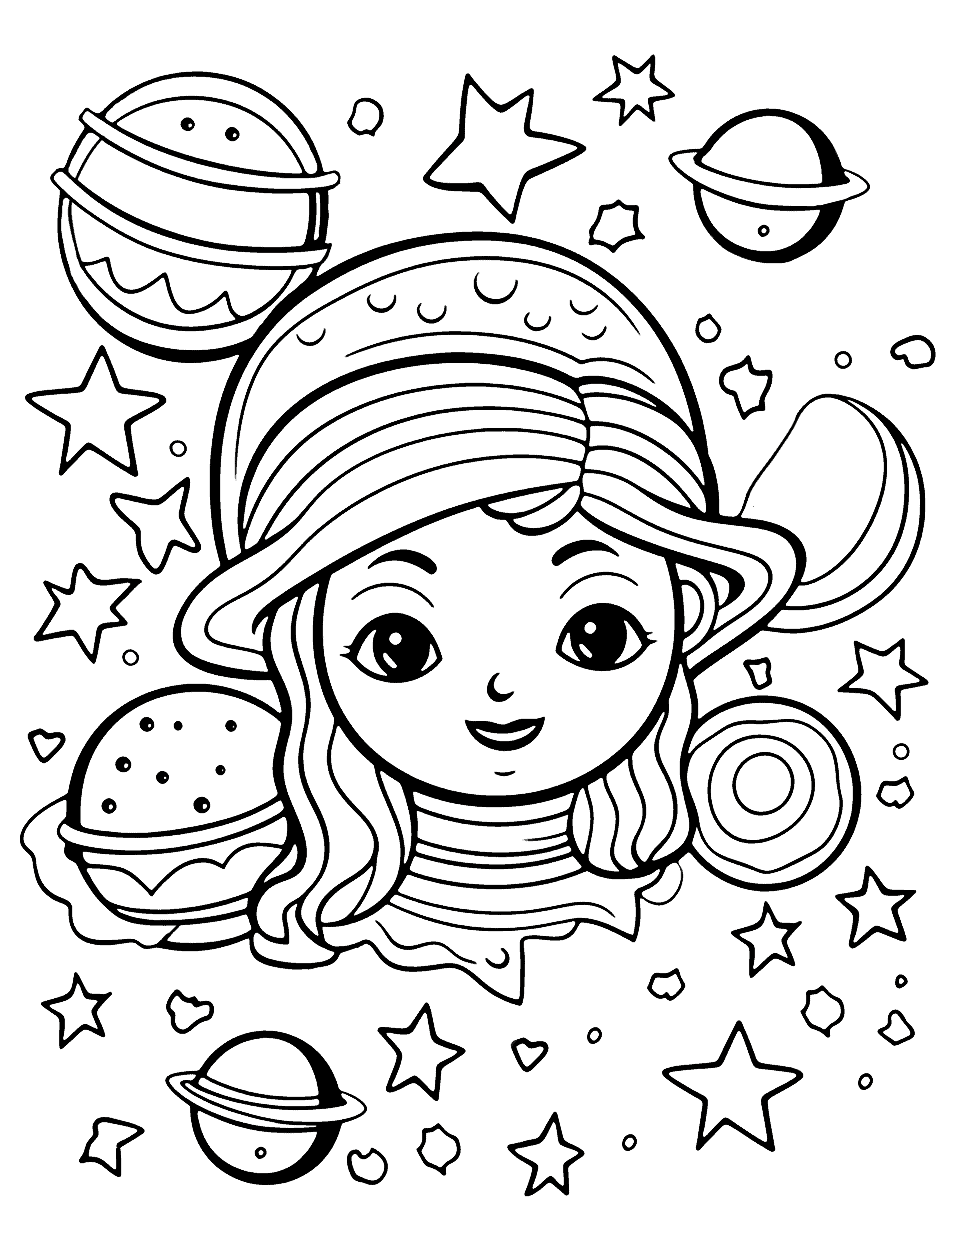 Kawaii Galaxy Adventure Adult Coloring Page - A cute, kawaii-style character on an adventure through a galaxy, surrounded by tiny stars and adorable planets.